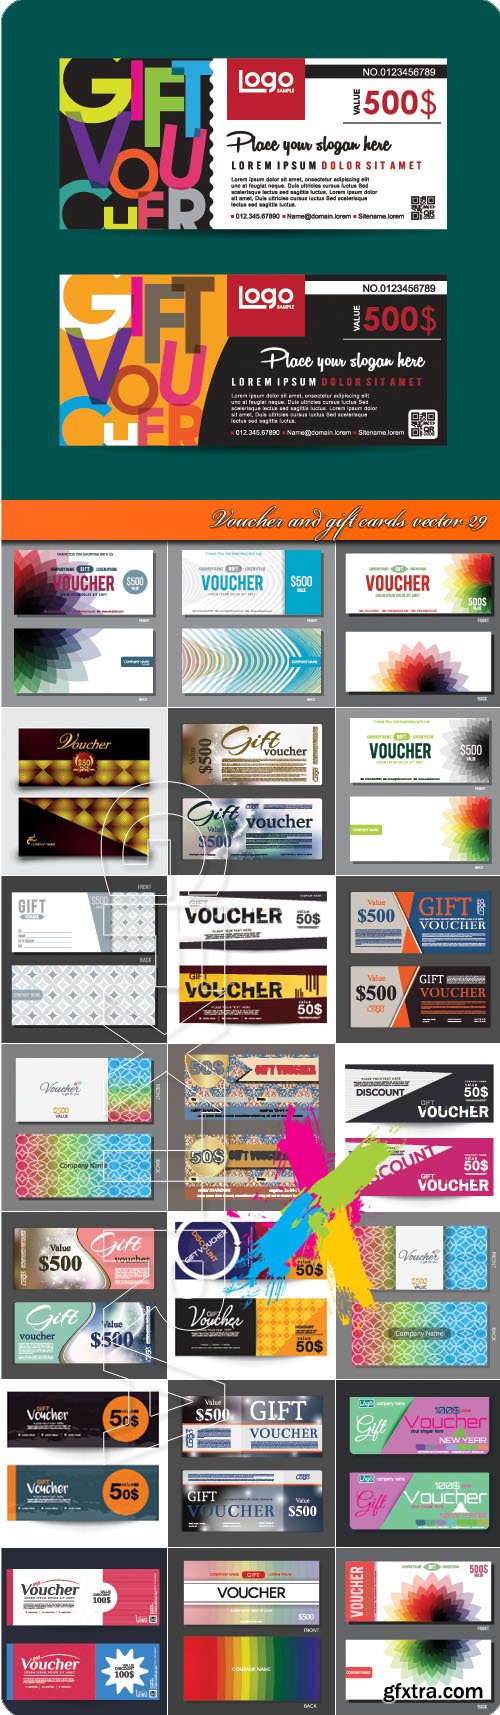 Voucher and gift cards vector 29